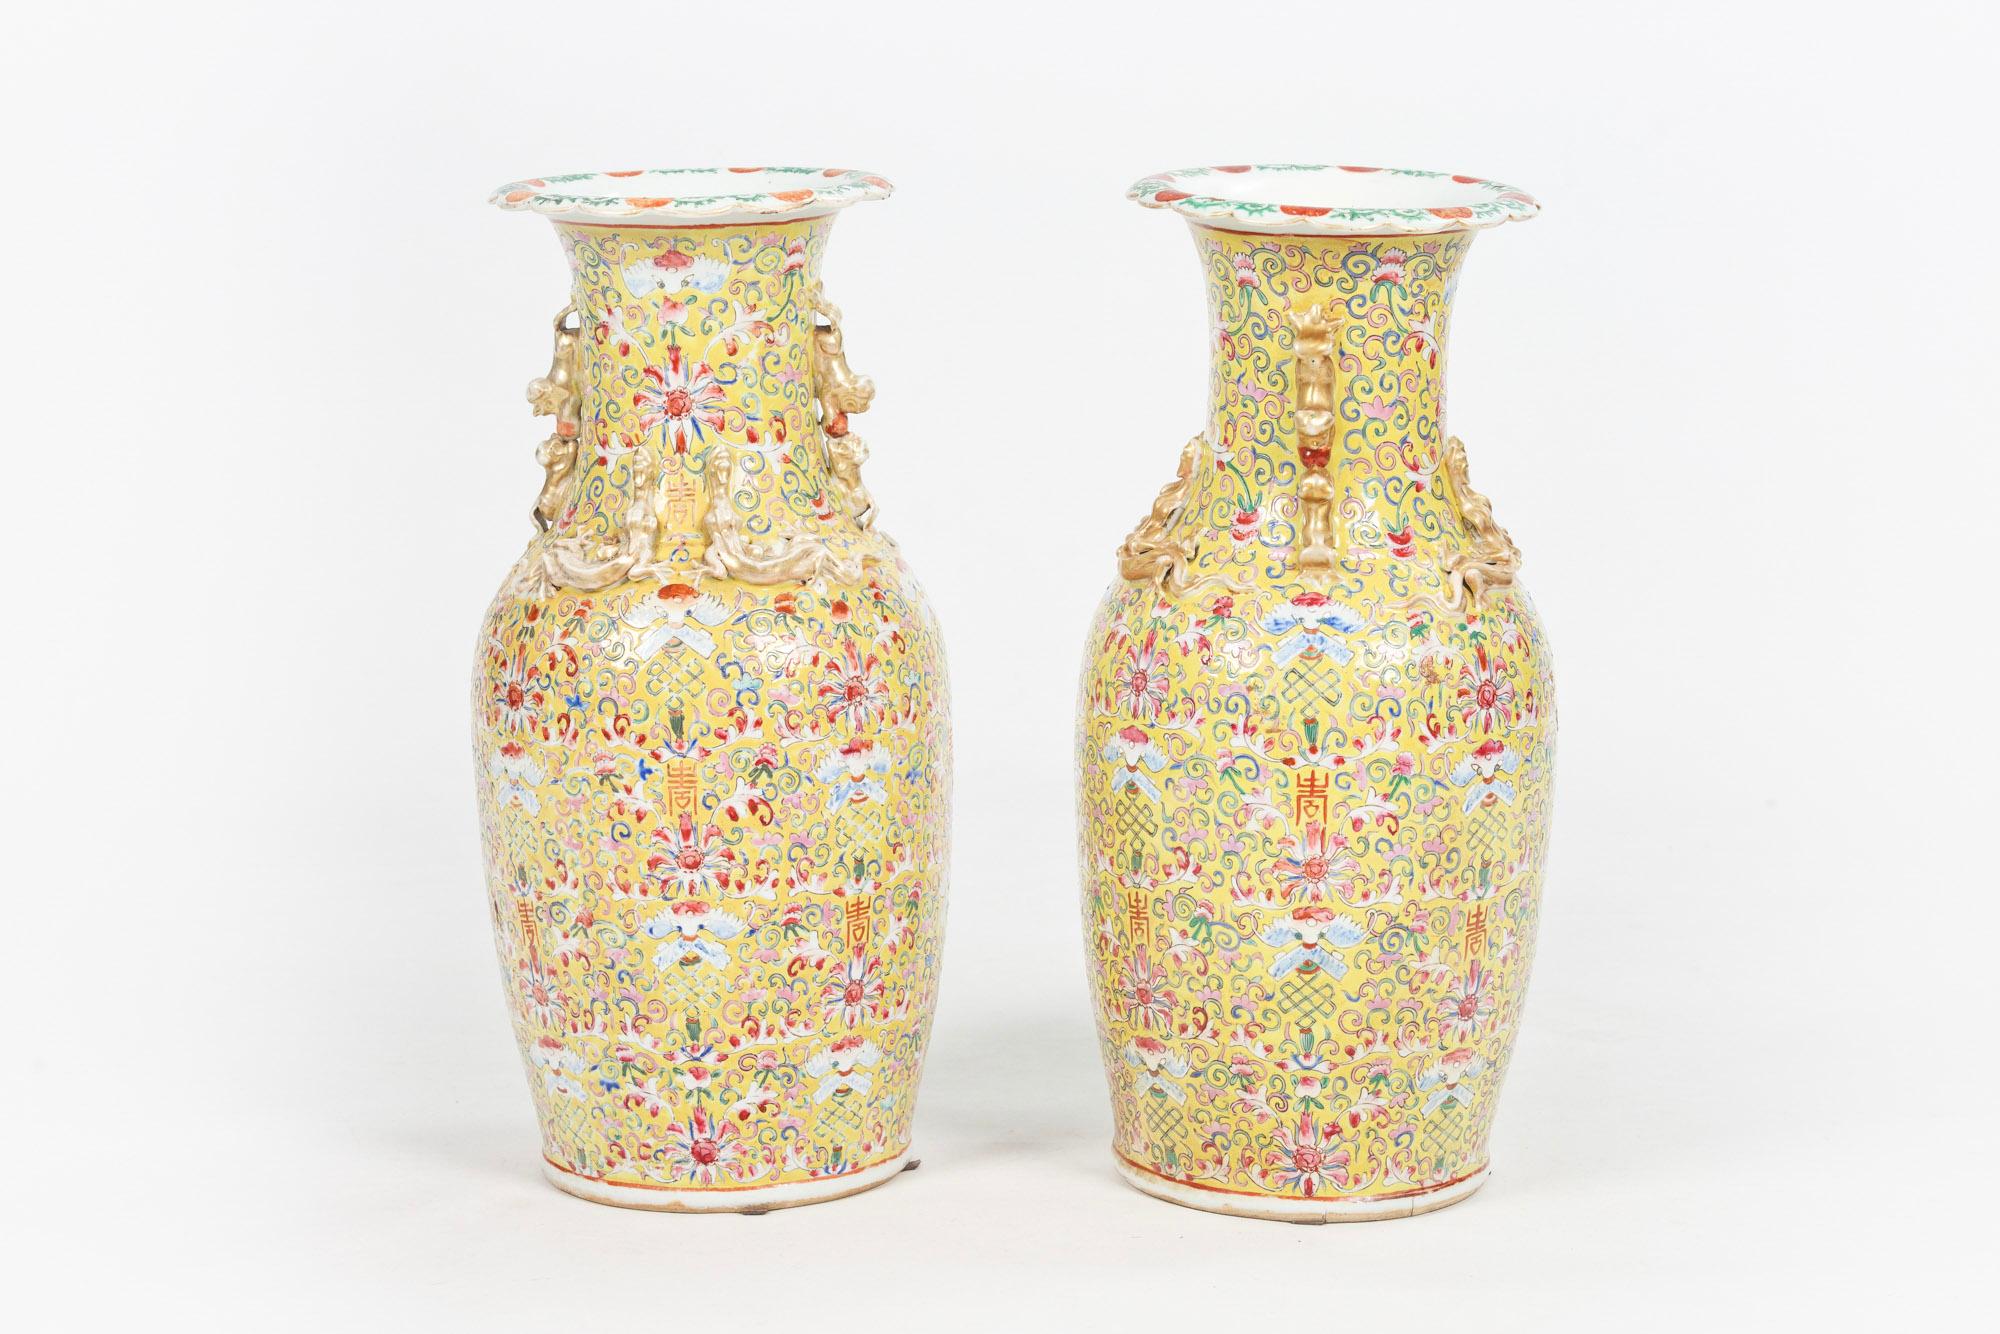 Early 19th Century Chinese Qing Dynasty Famille Jaune Pair of Vases In Good Condition For Sale In Dublin 8, IE